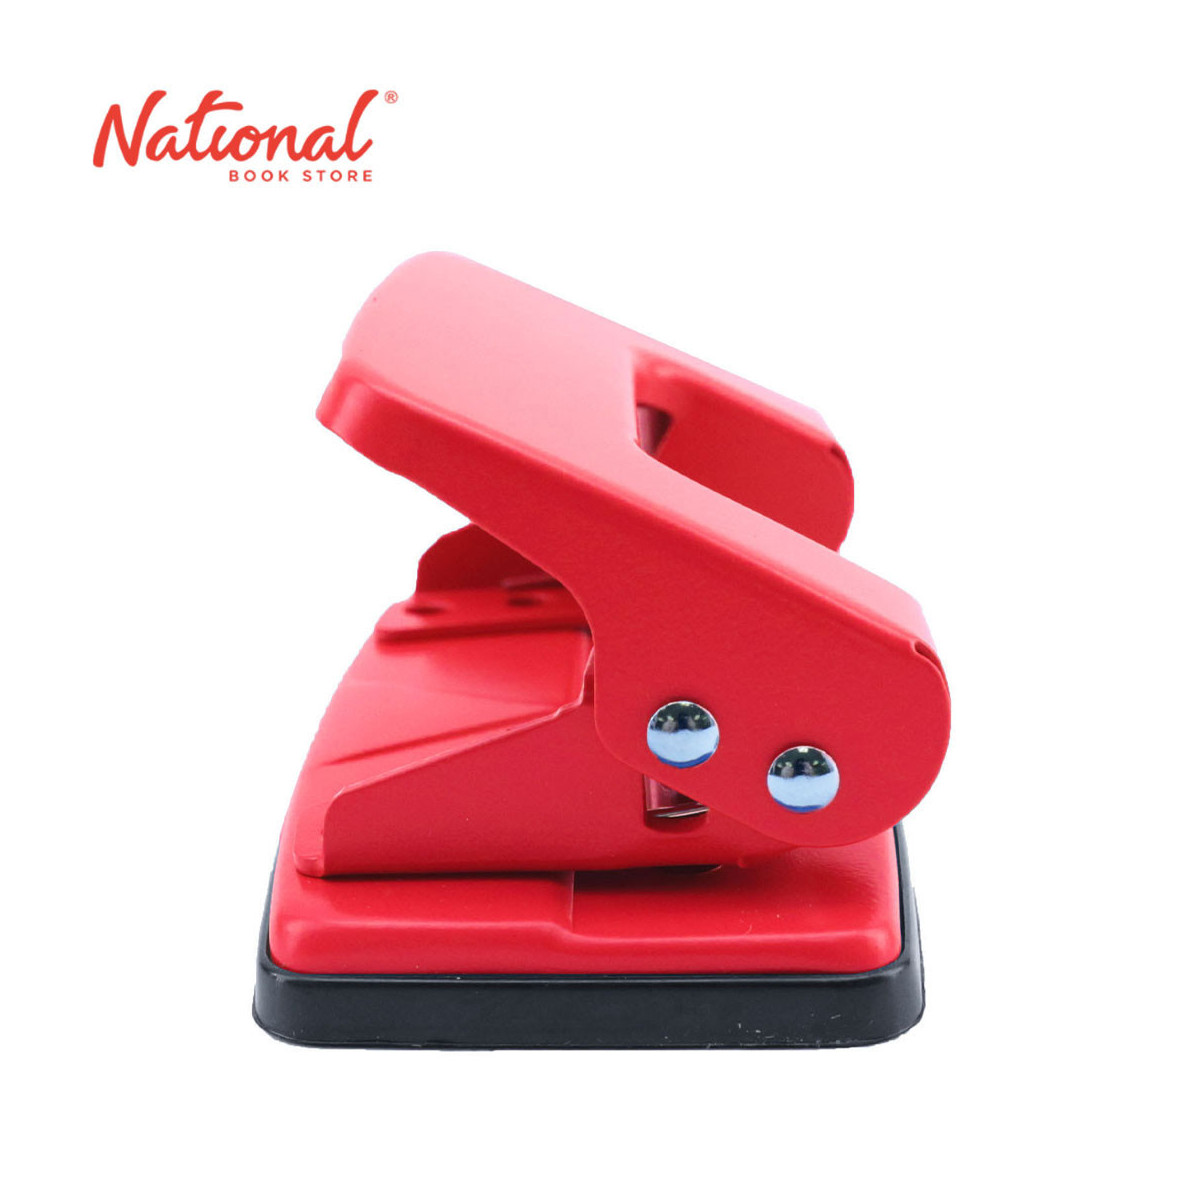 2 Hole Paper Punch Metal Hole Puncher 10 Sheet Capacity Adjustable, Red